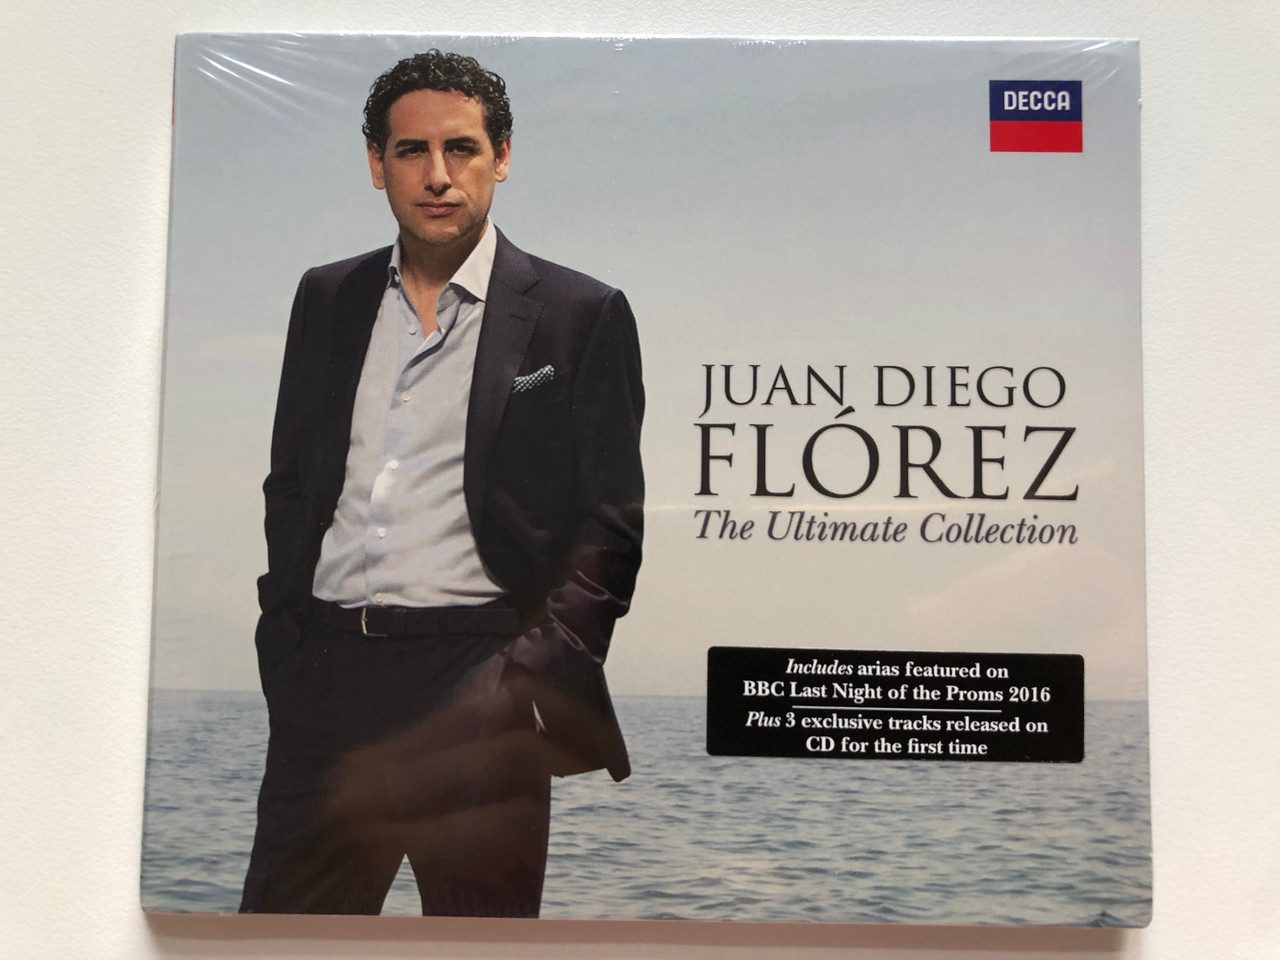 https://cdn10.bigcommerce.com/s-62bdpkt7pb/products/0/images/224019/Juan_Diego_Florez_The_Ultimate_Collection_Includes_arias_featured_on_BBC_Last_Night_of_the_Proms_2016_Plus_3_exclusive_tracks_released_on_CD_for_the_first_time_Decca_Audio_CD_2016_48308_1__91413.1650631593.1280.1280.JPG?c=2&_gl=1*2tq0h*_ga*MjA2NTIxMjE2MC4xNTkwNTEyNTMy*_ga_WS2VZYPC6G*MTY1MDYyNDk3OS4zNjYuMS4xNjUwNjMxNDc3LjMw